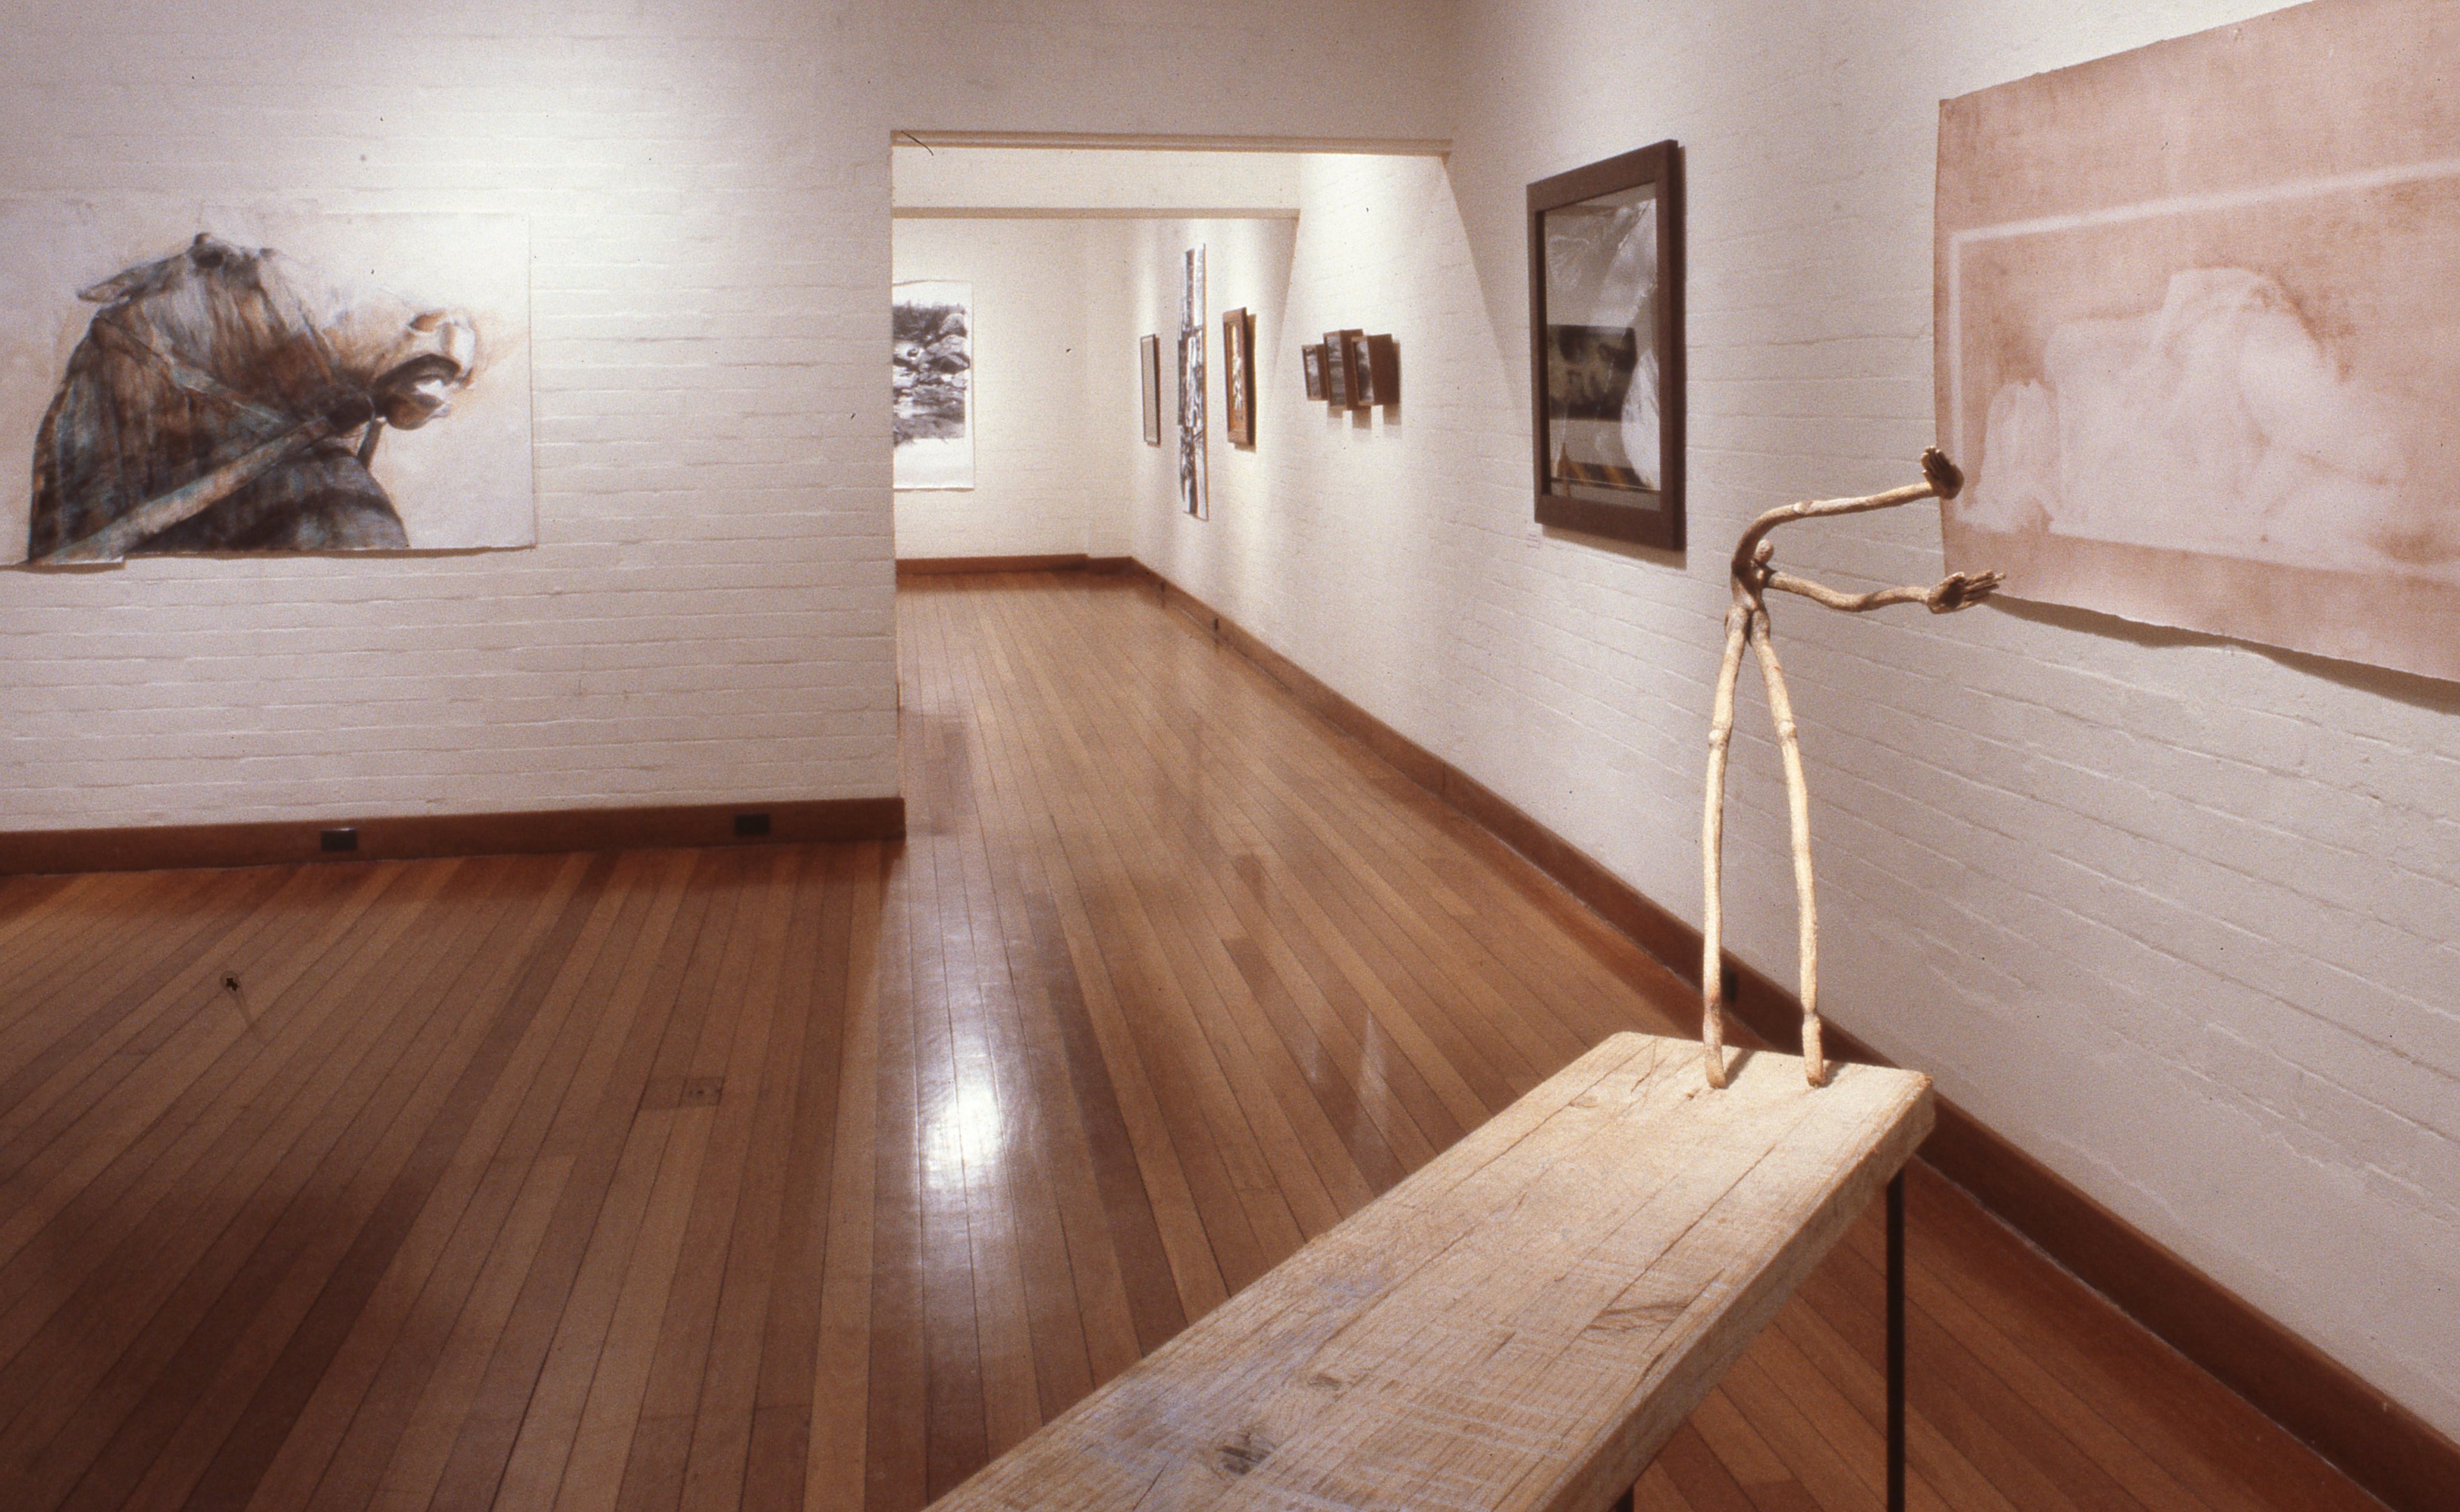 1992_telecom_fine_art_scholarships_for_the_college_of_fine_arts_unsw_copy_installidg_archive_.jpg